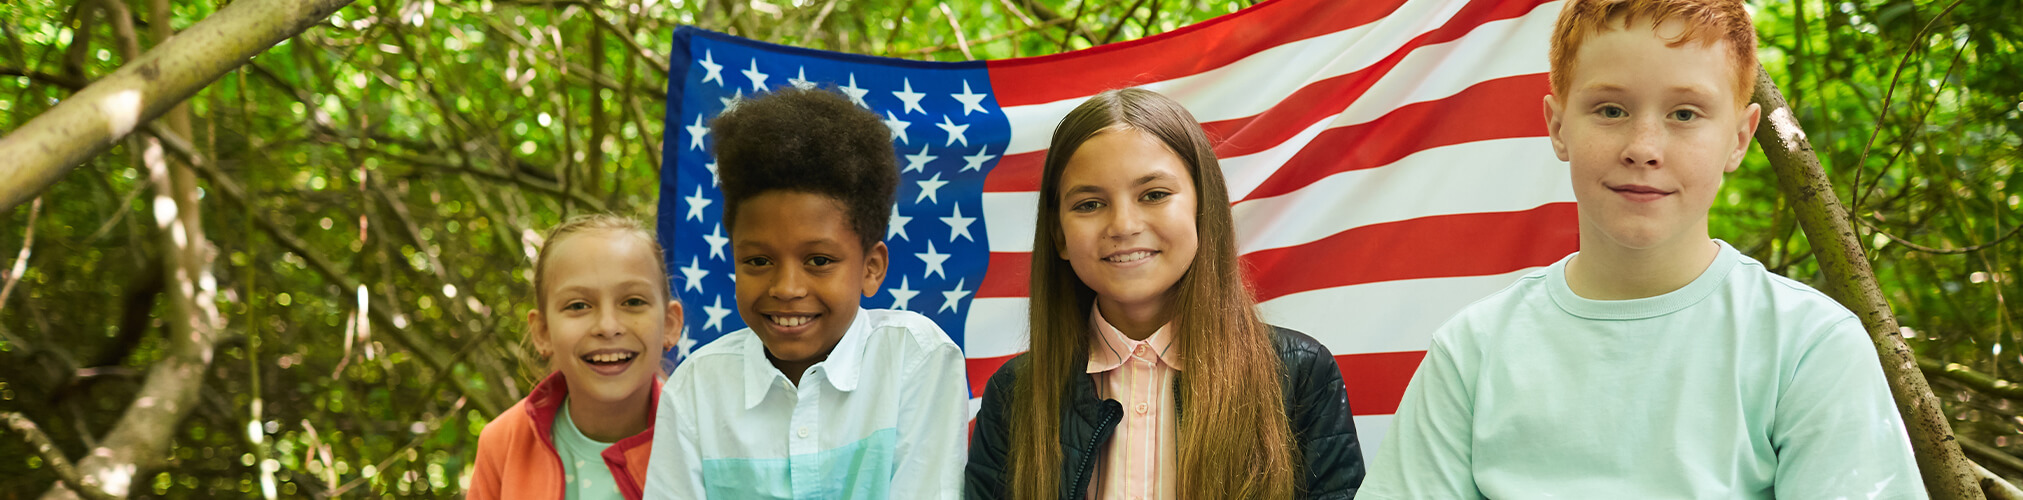 Children in front of American flag